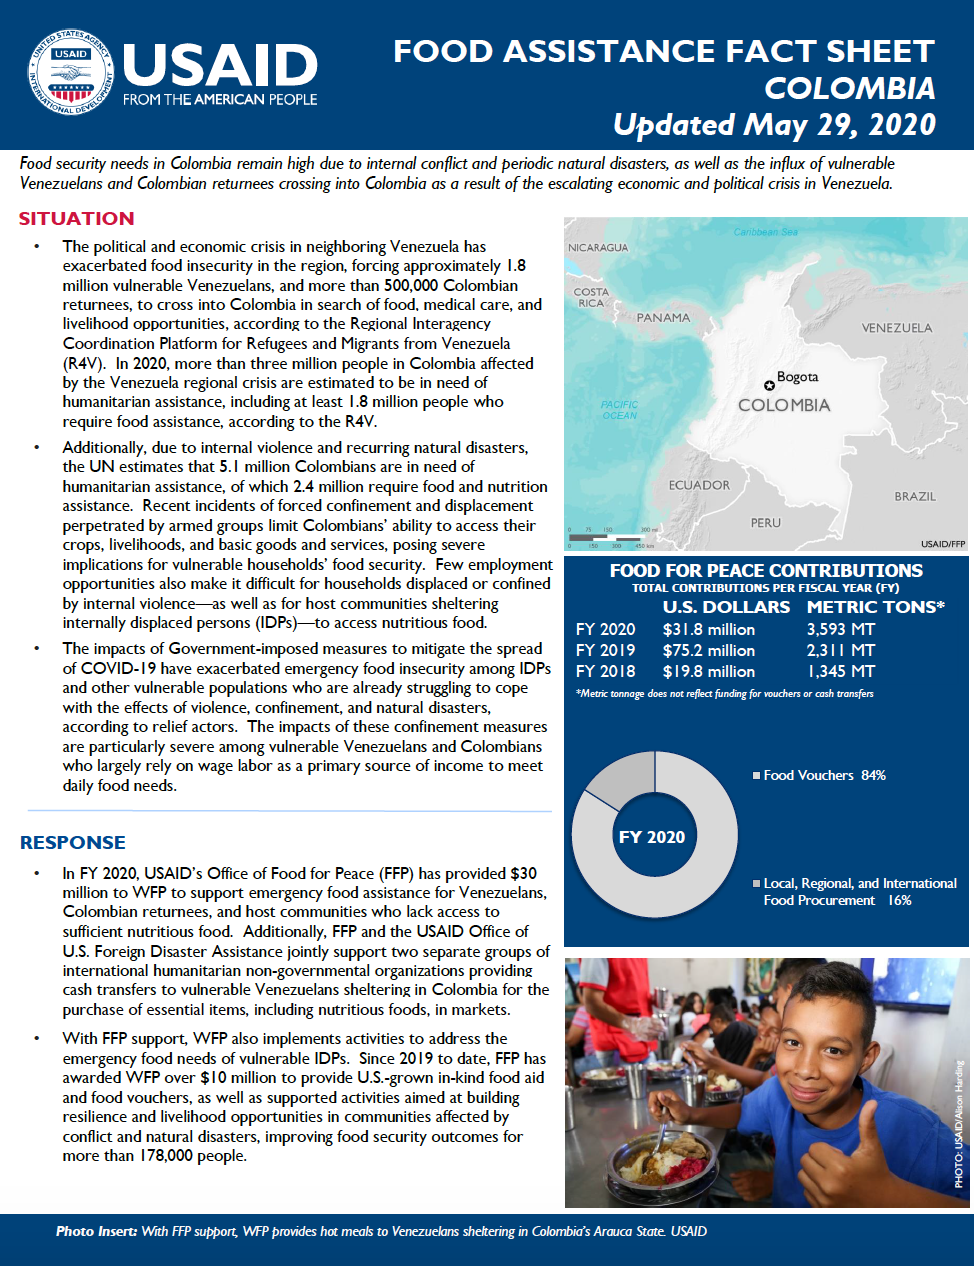 Food Assistance Fact Sheet - Colombia